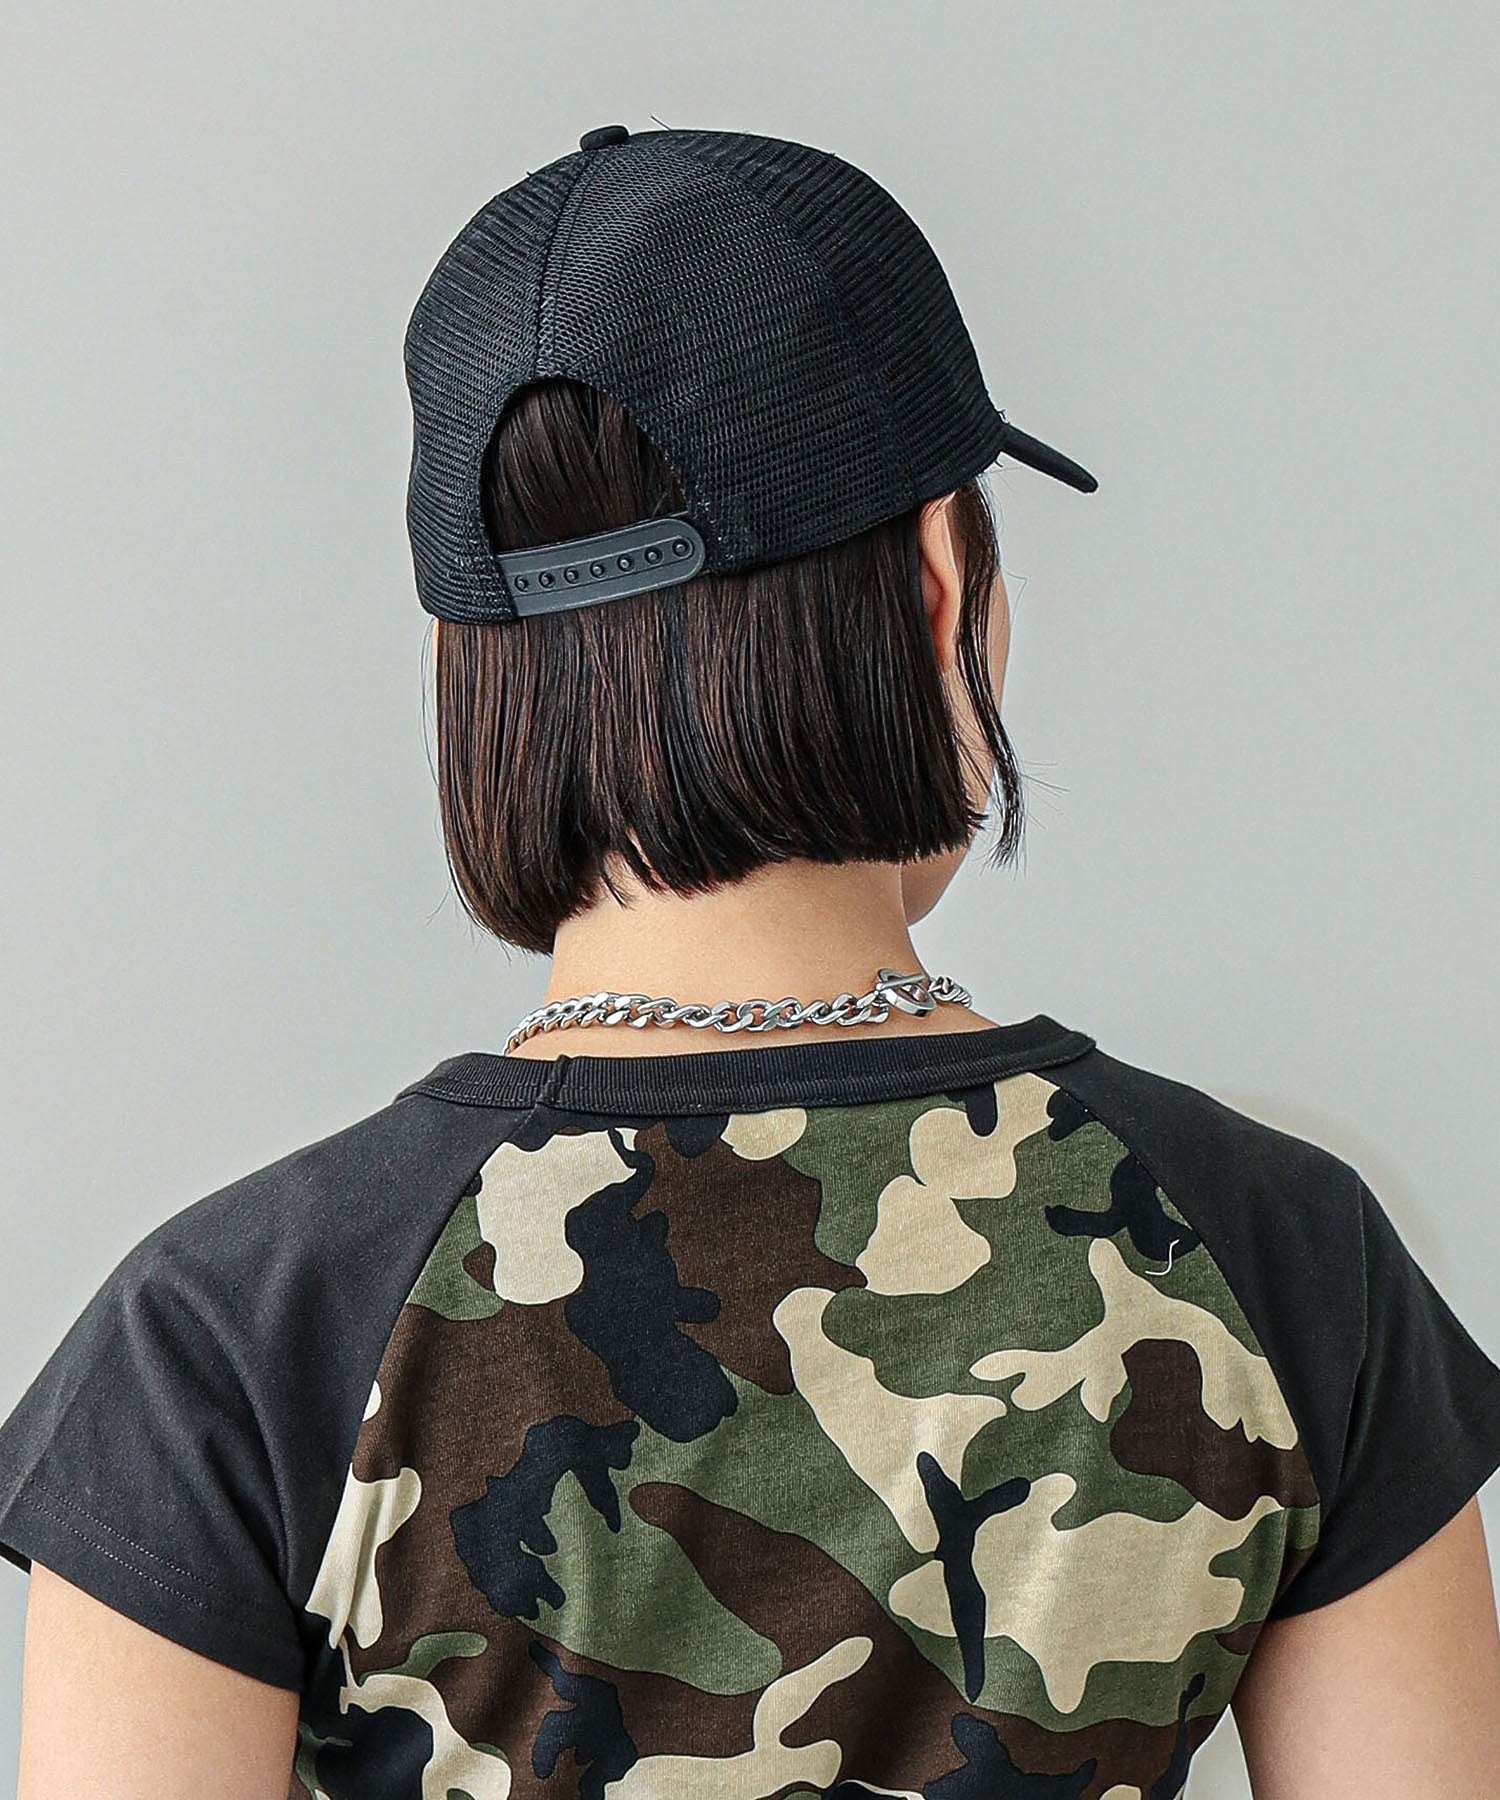 SPRAY PRINT AND EMBROIDERY TRUCKER CAP X-girl